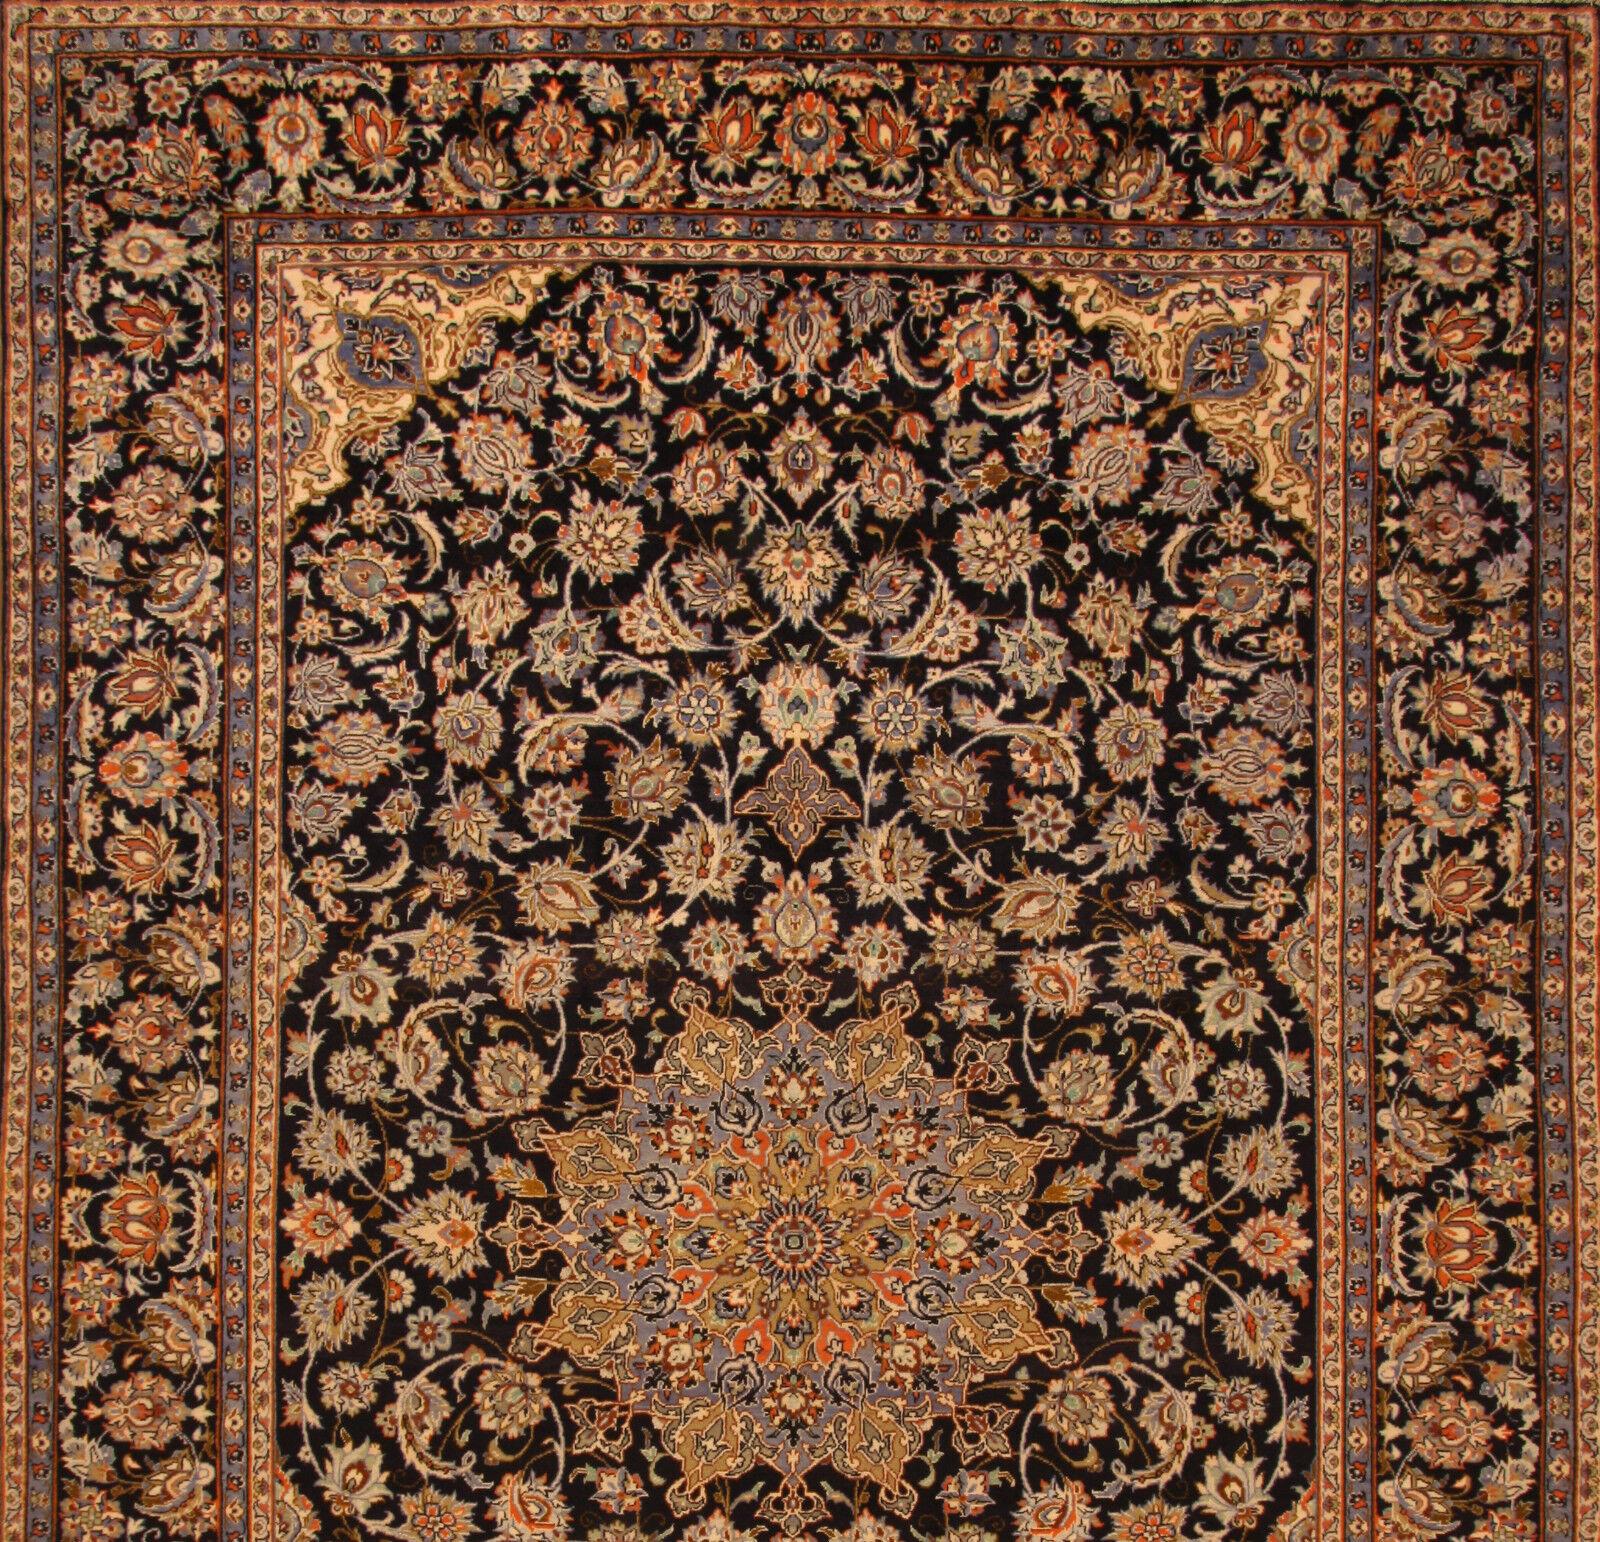 Handmade Vintage Persian Style Tabriz Rug 9.5' x 14.5', 1970s - 1T35 For Sale 3